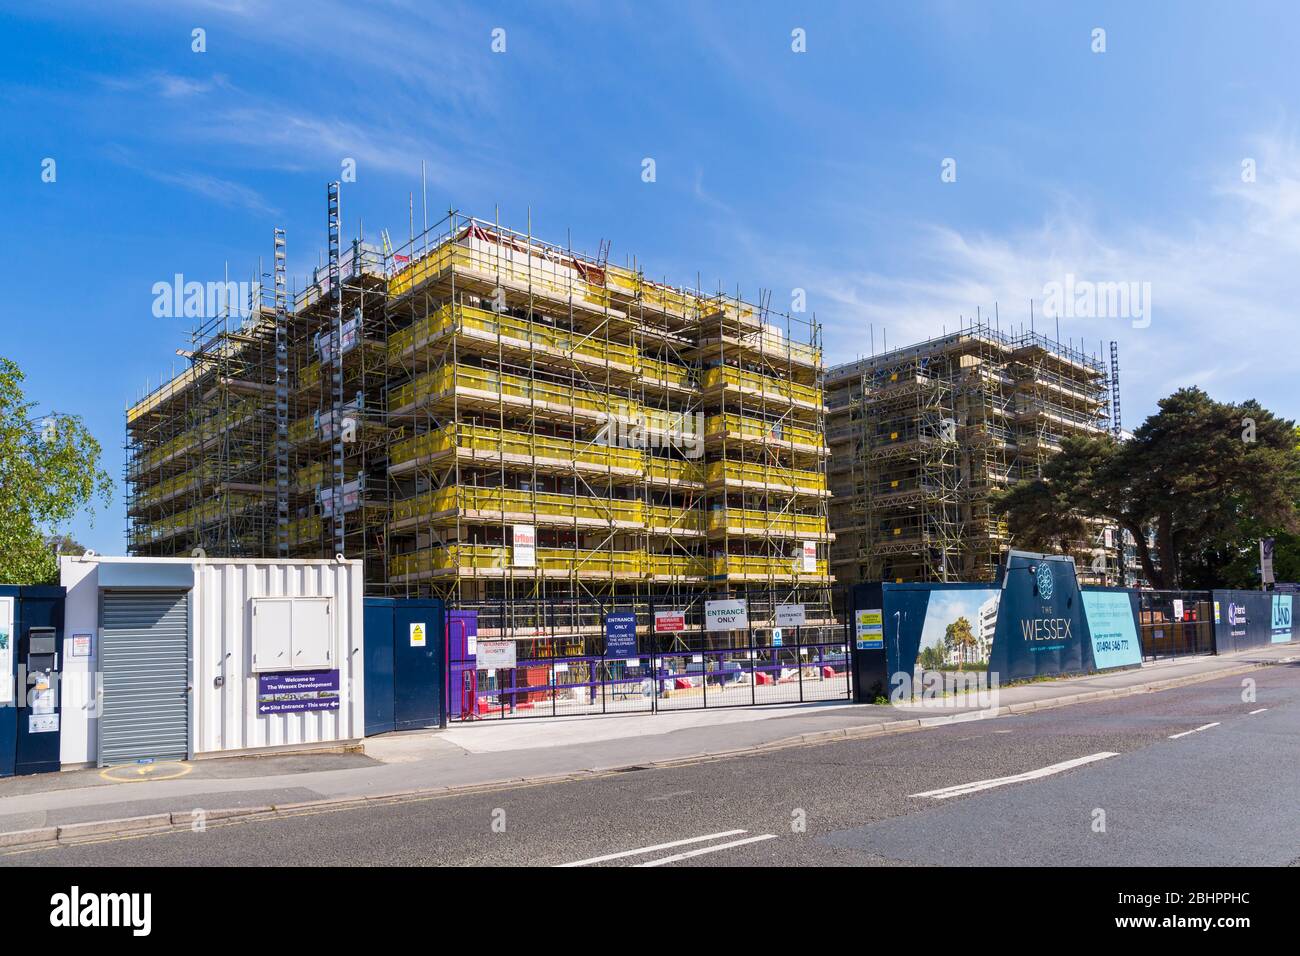 Construction of the Wessex Development site at West Cliff, Bournemouth, Dorset UK in April - shut down closed due to Coronavirus COVID 19 Stock Photo